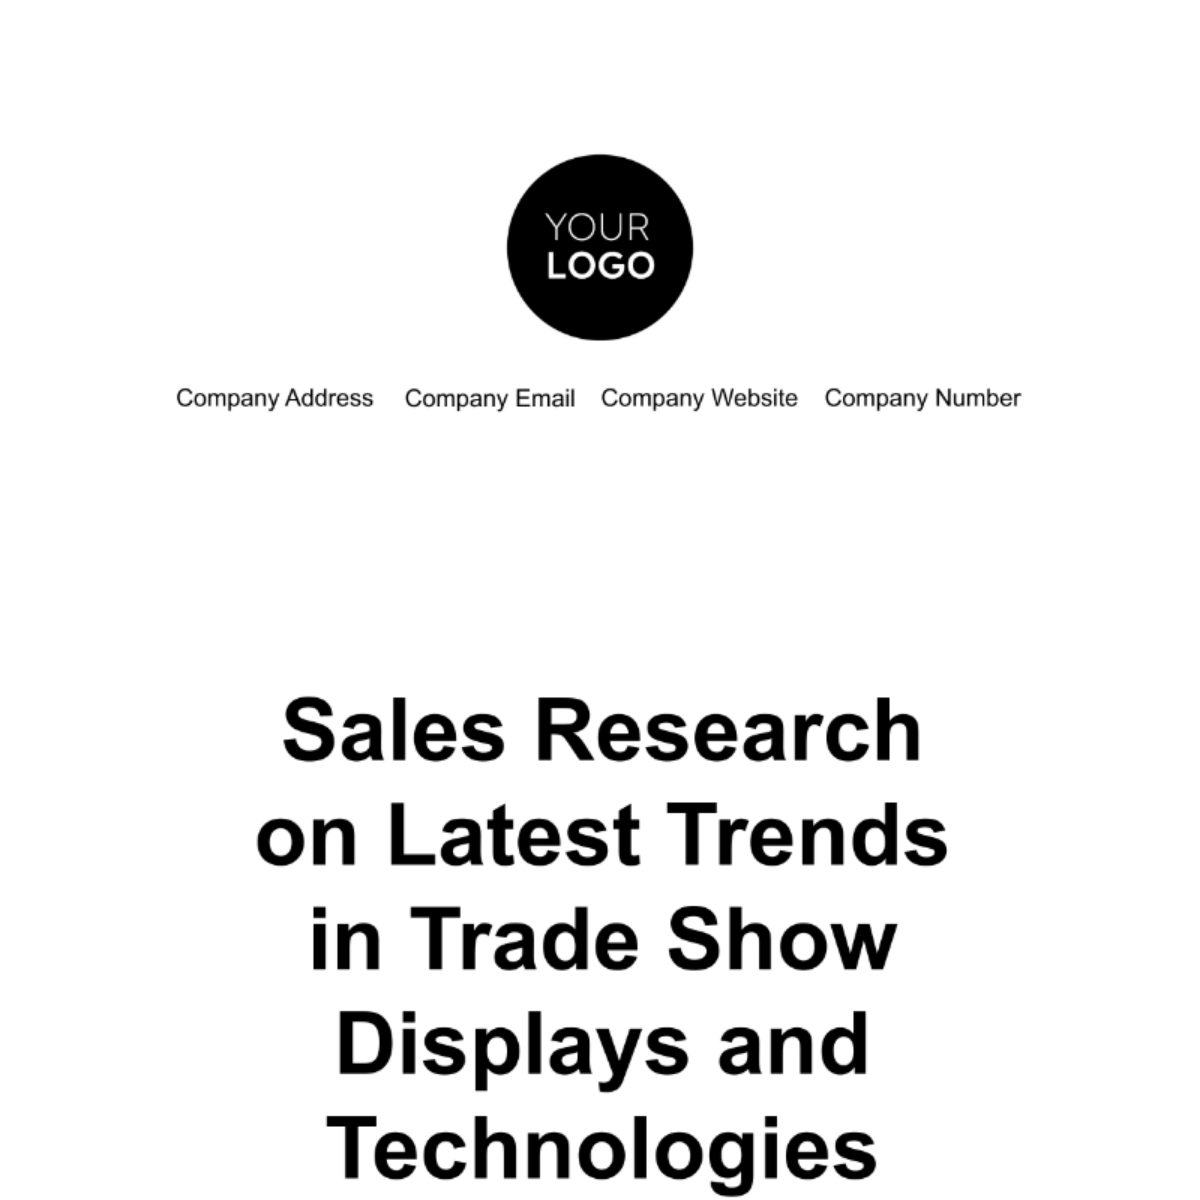 Free Sales Research on Latest Trends in Trade Show Displays and Technologies Template